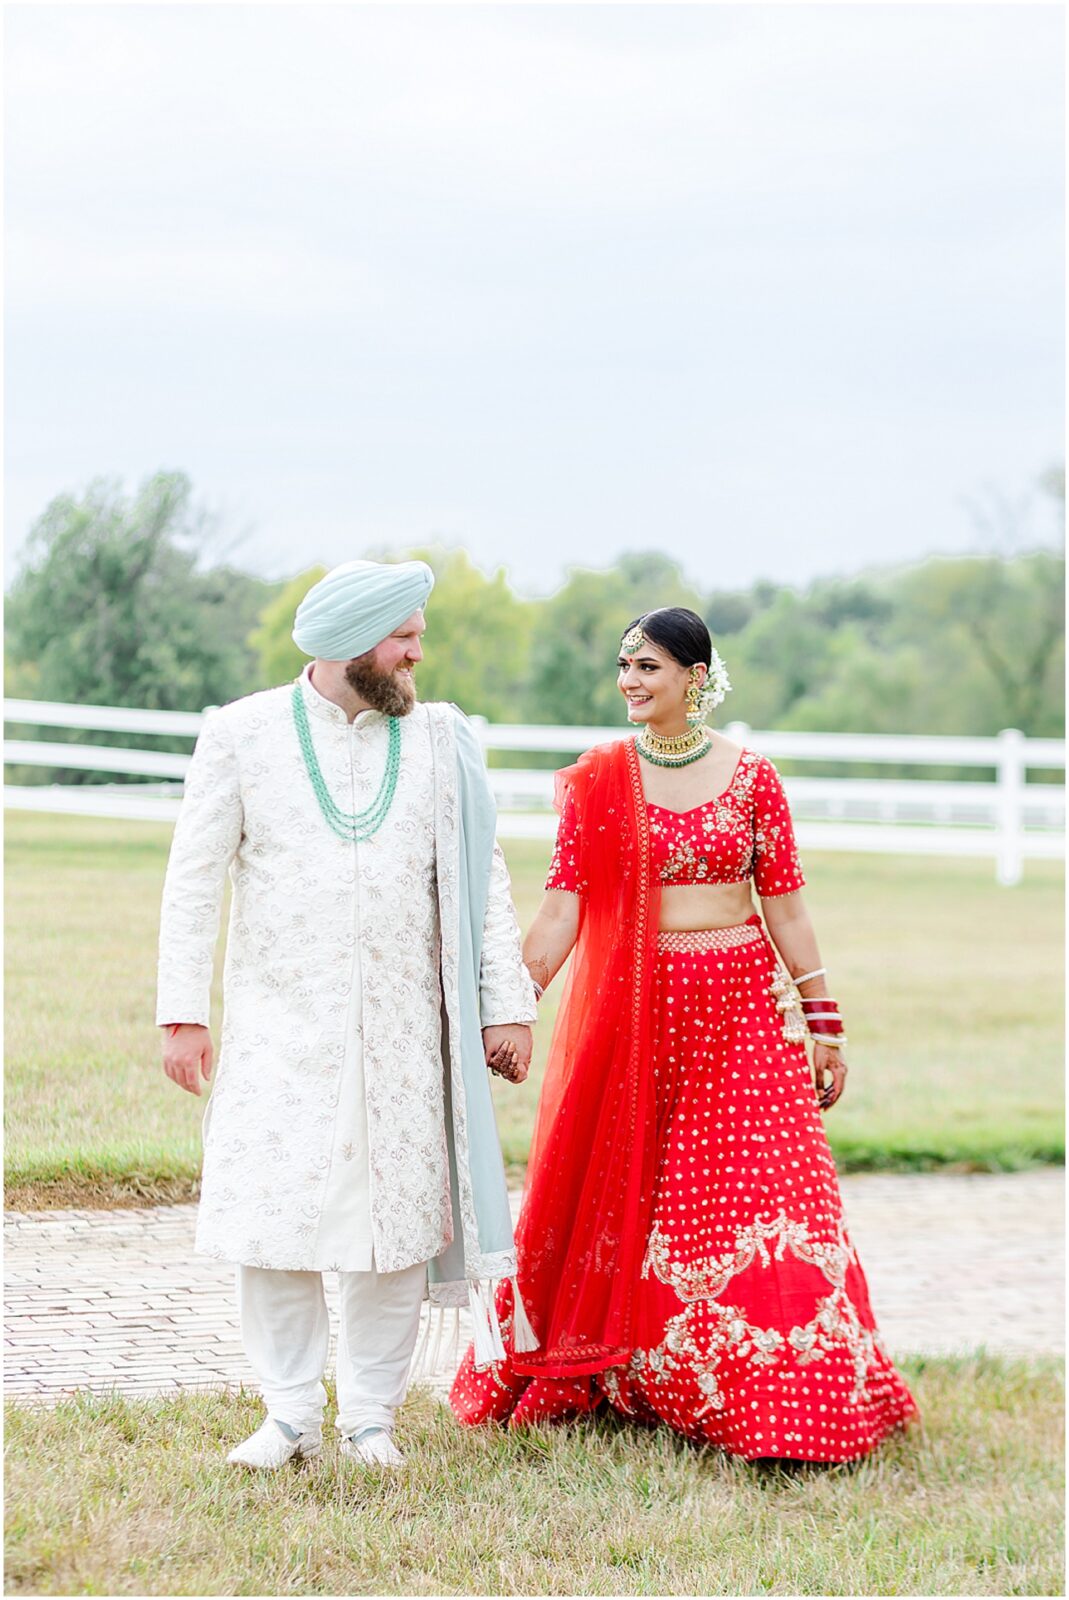 Timeless South Asian Bridal Portraits - Capturing the Essence of an Indian Fusion Sikh Wedding at Kansas Mildale Farms, including Sangeet, henna, baraat, dholi, by Mariam Saifan Photography - Your Kansas City Wedding Photographer of Choice